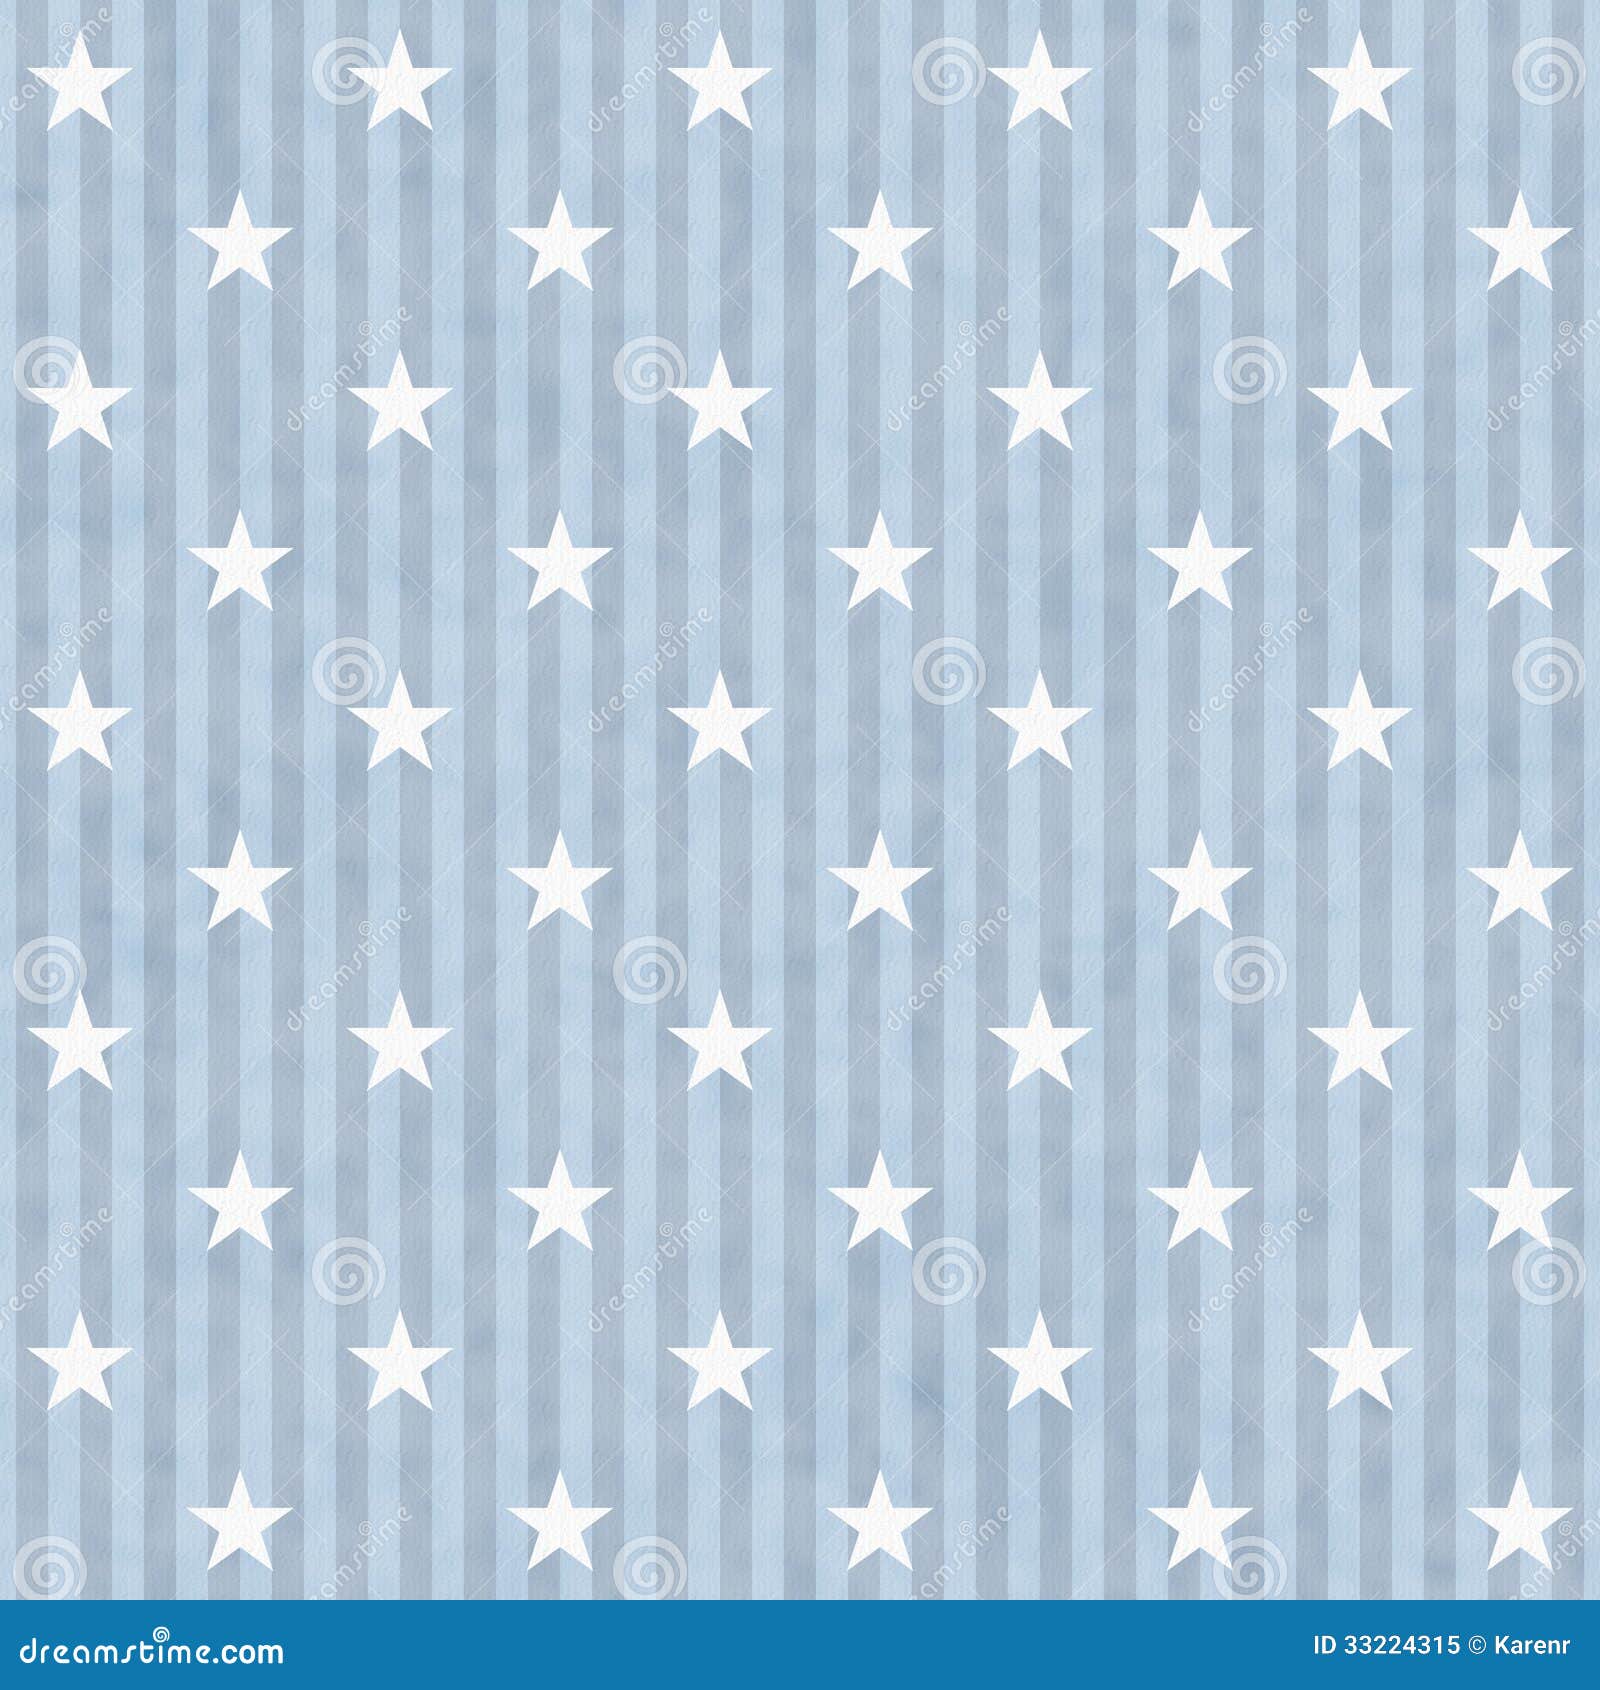 blue and white stars and stripes fabric background